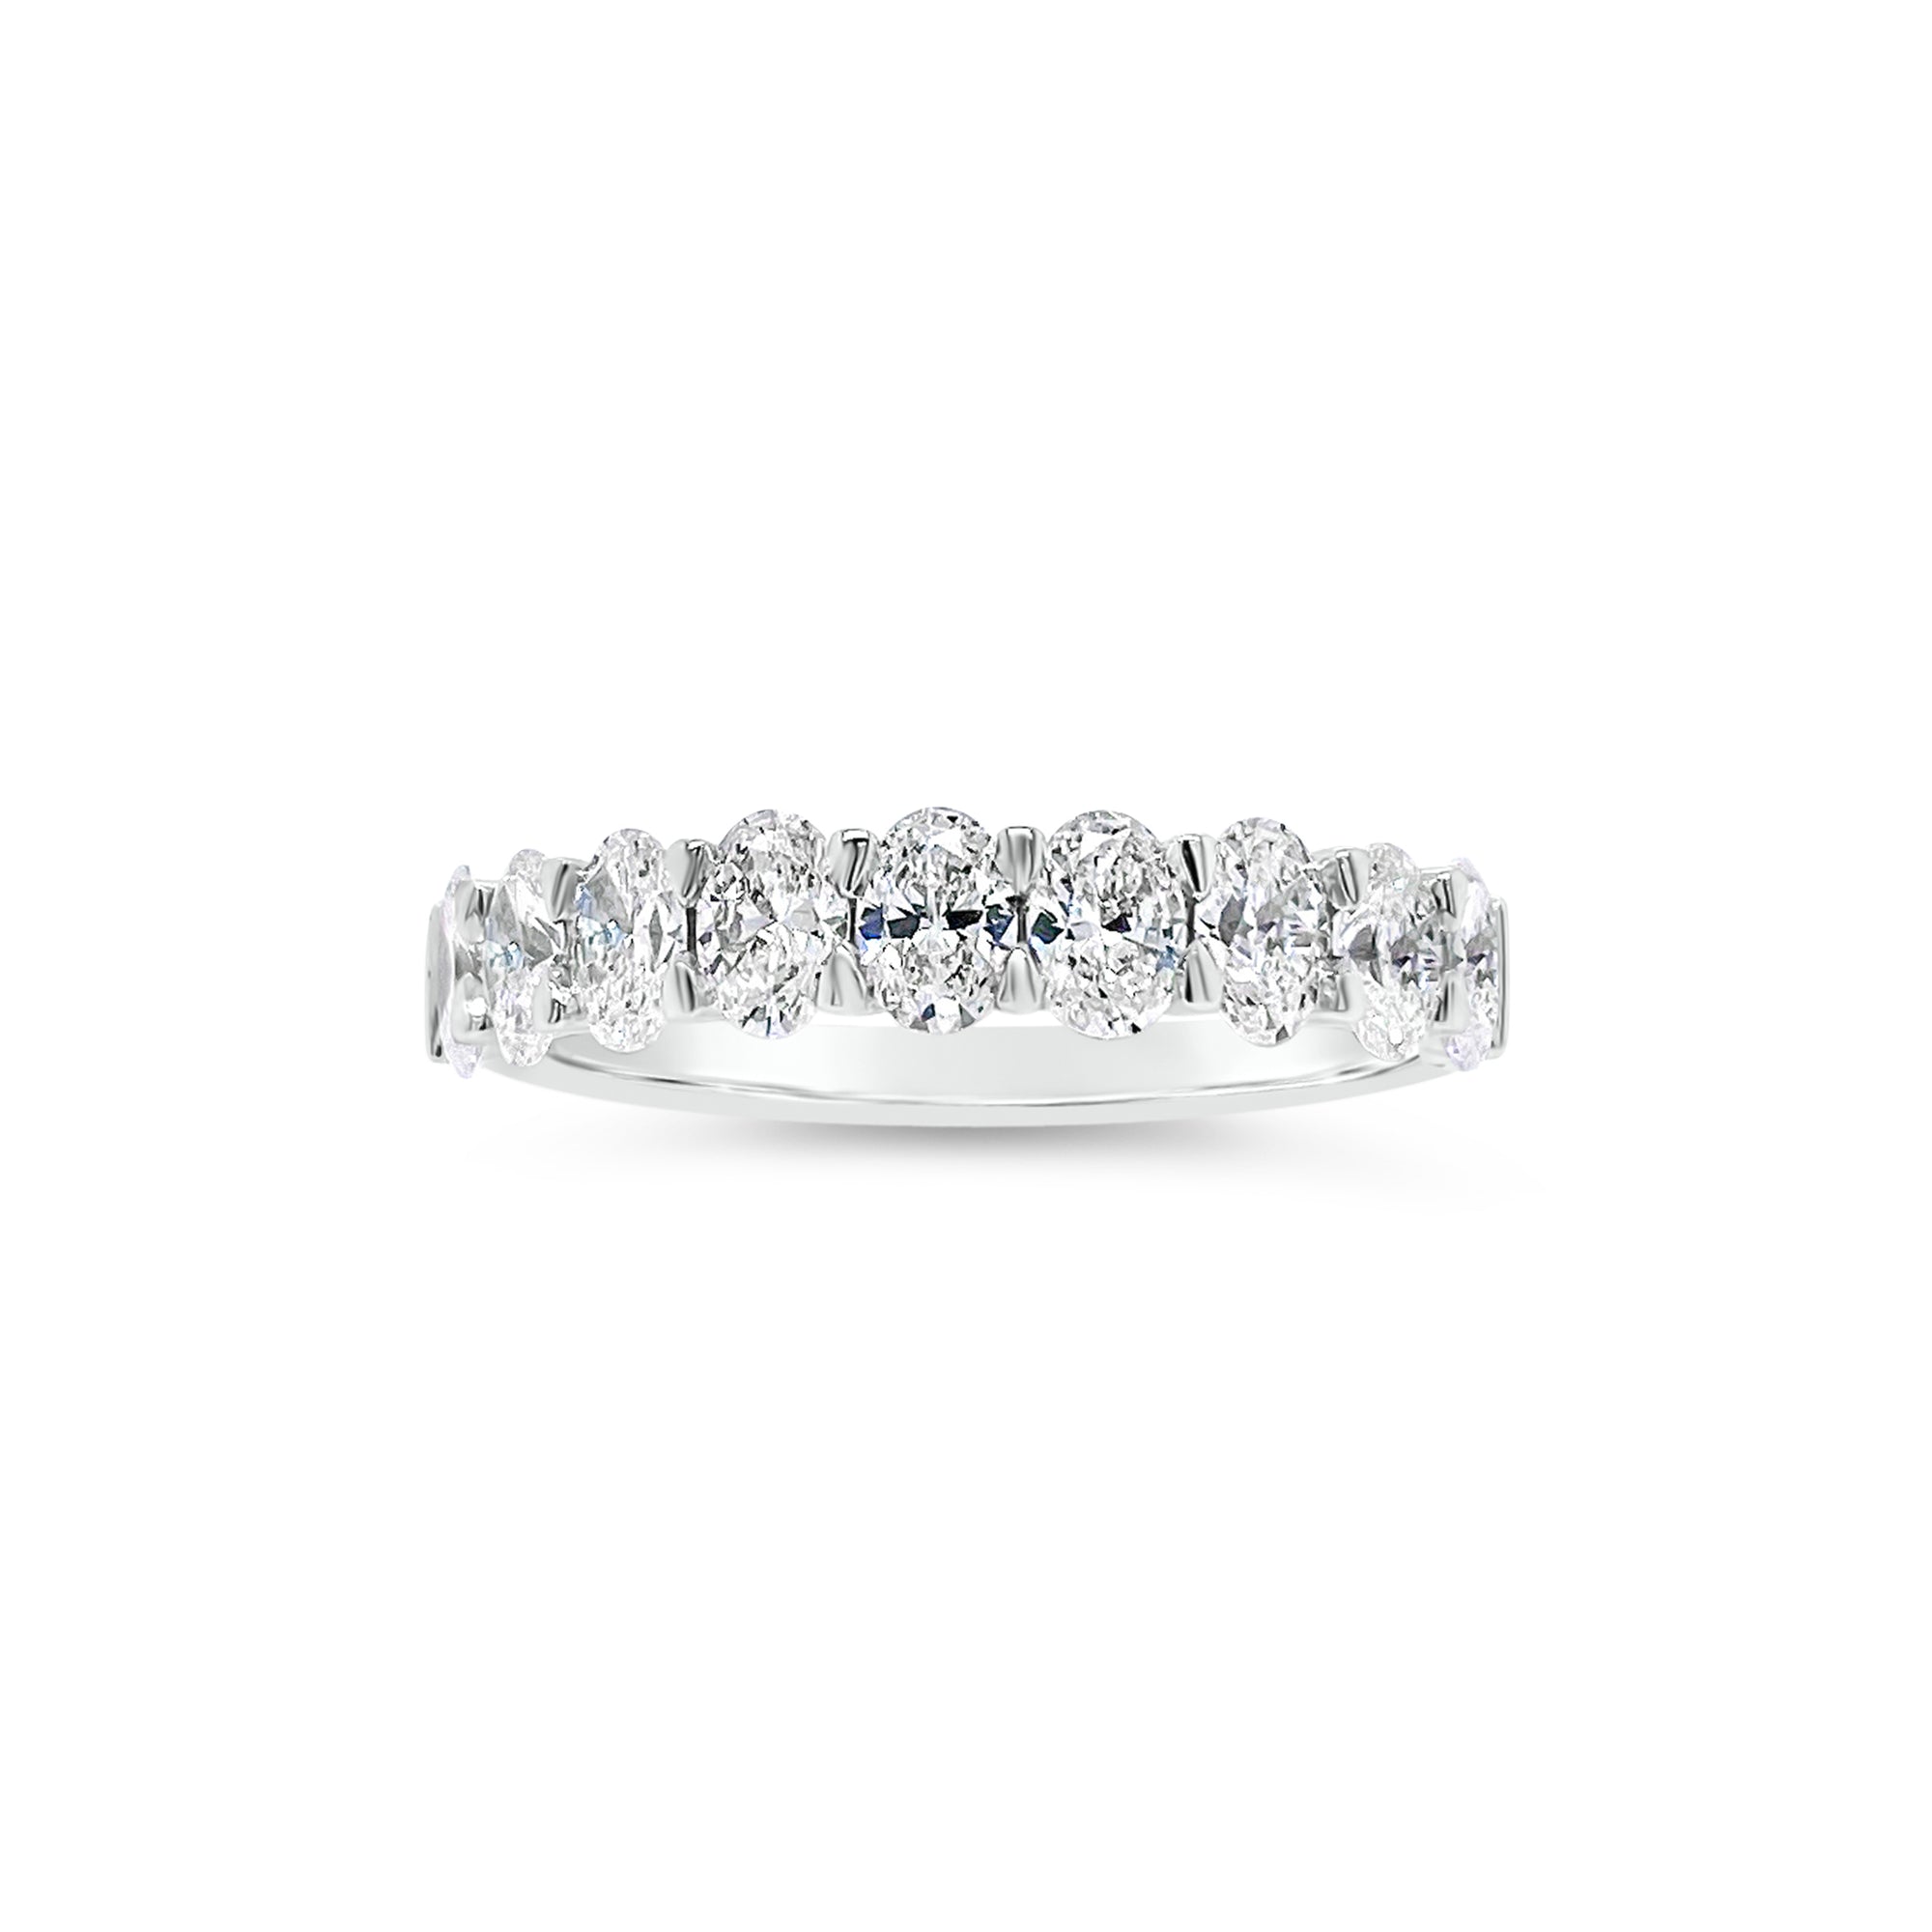 Diamond Ovals Wedding Band -18K white gold weighing 3.46 grams -9 oval-shaped diamonds totaling 1.31 carats